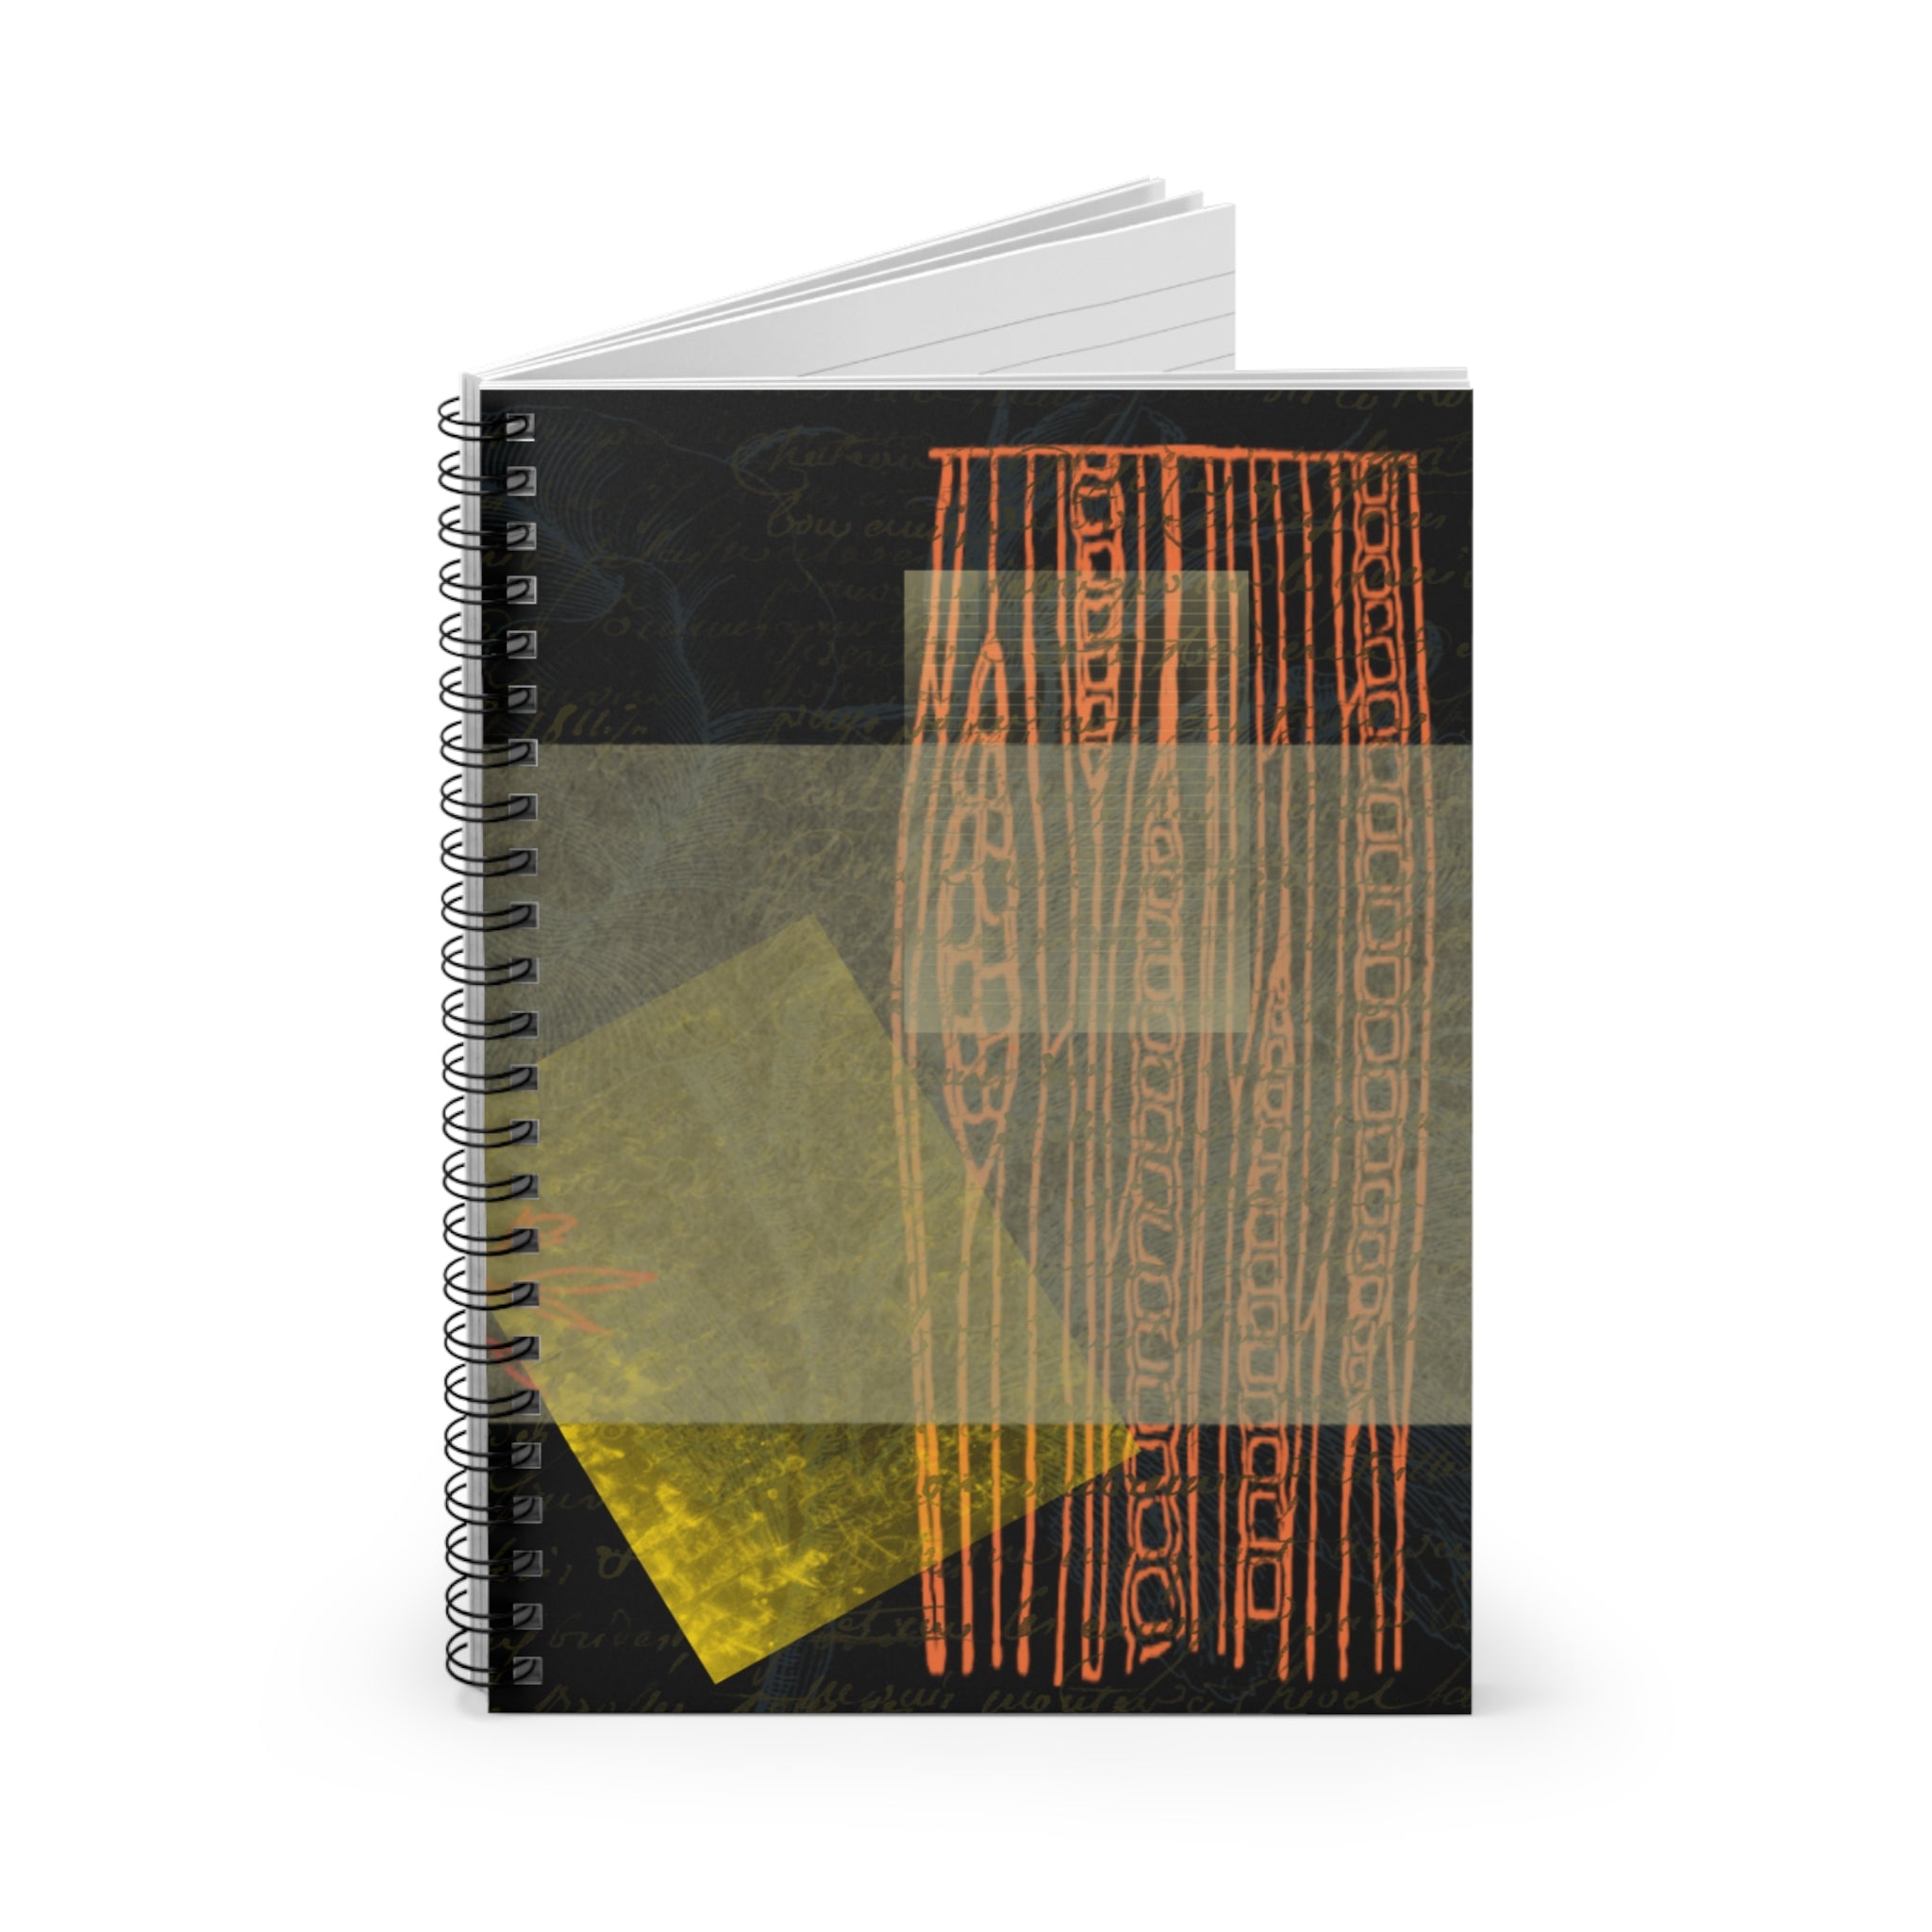 ANCIENT PATTERNS Spiral Notebook - Ruled Line